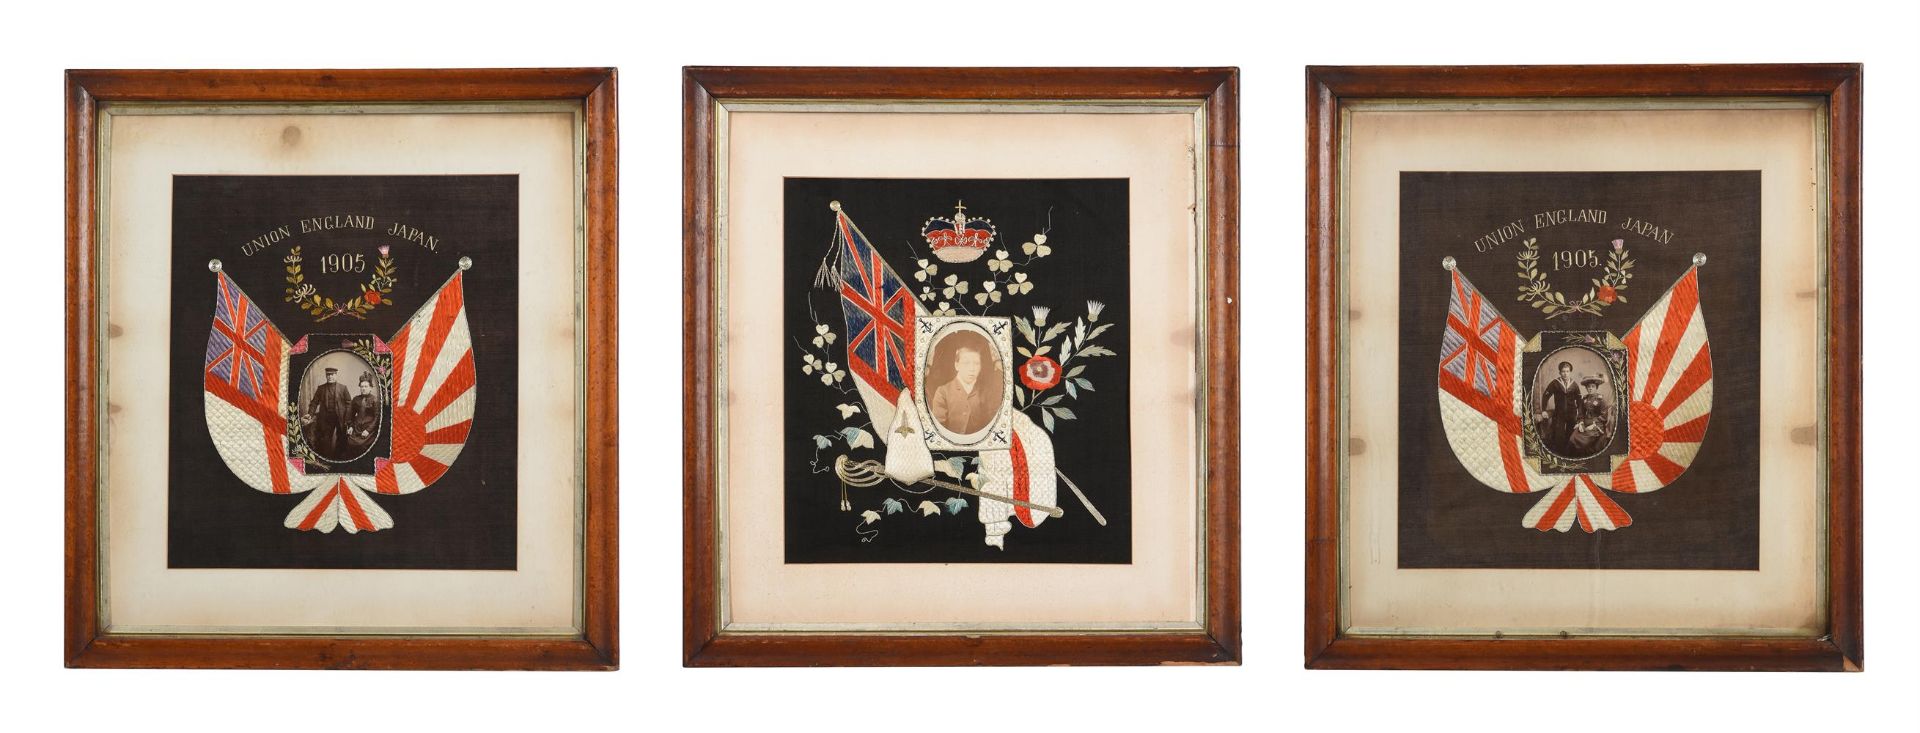 Three Japanese Anglo-Japanese Alliance 'Naval' silk embroideries